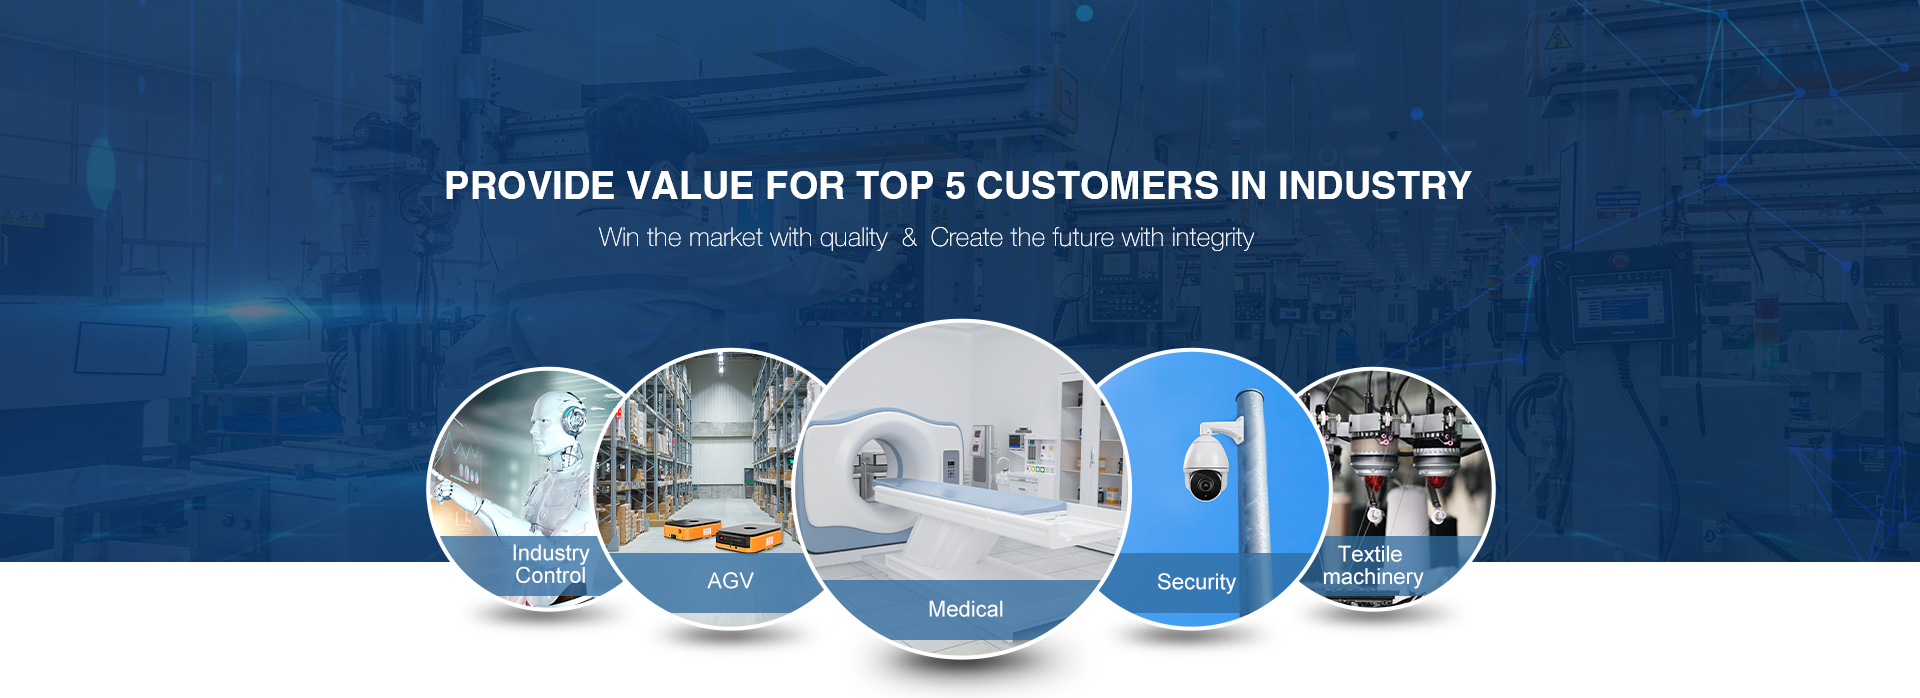 Provide value for TOP 5 customers in industry